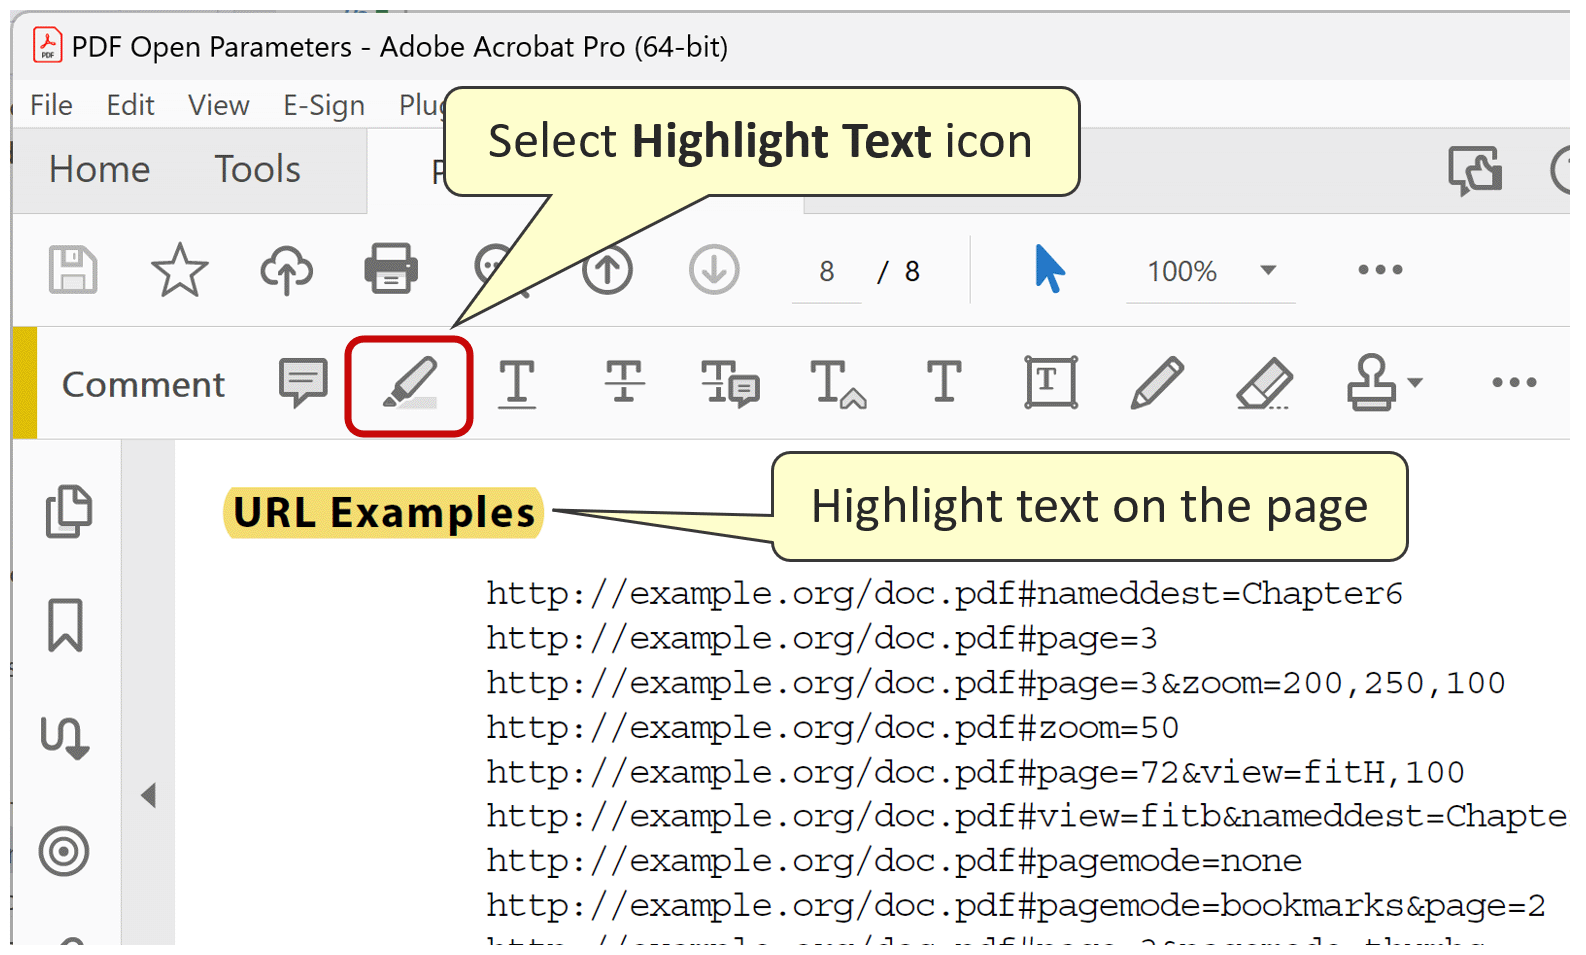 Select Highlight Text icon and highlight text on the page